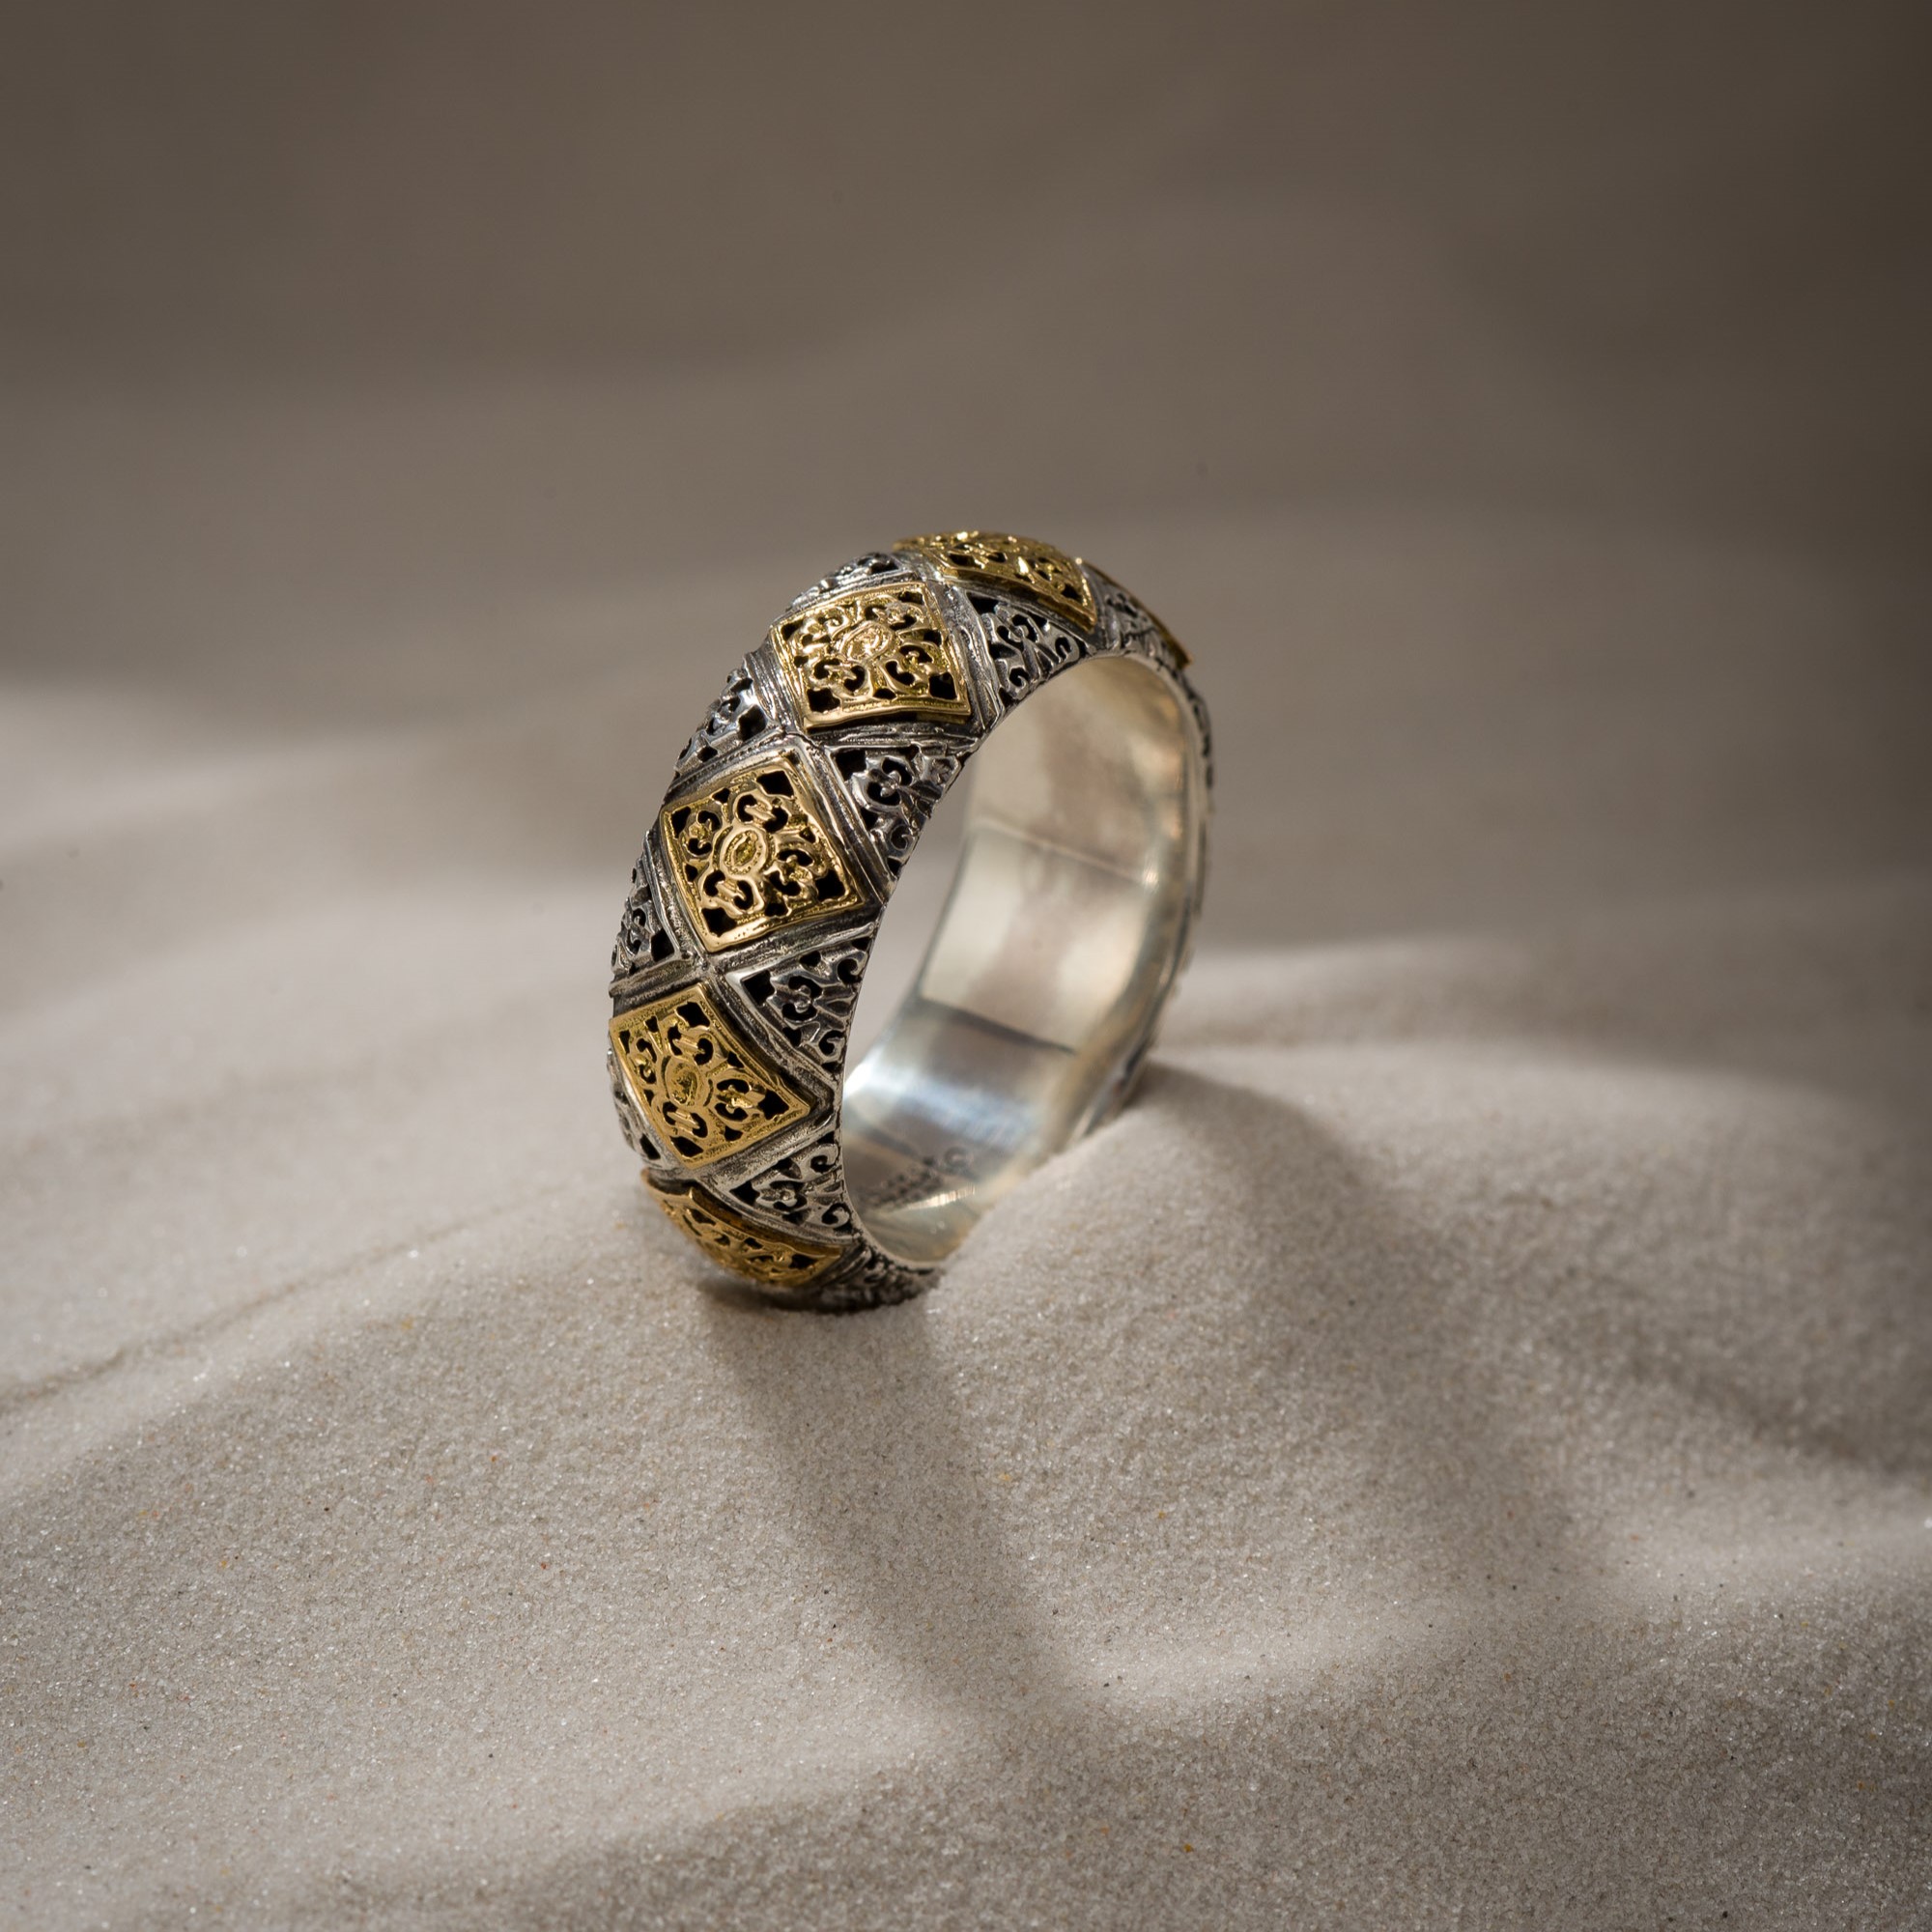 Band ring in 18K Gold and Sterling Silver